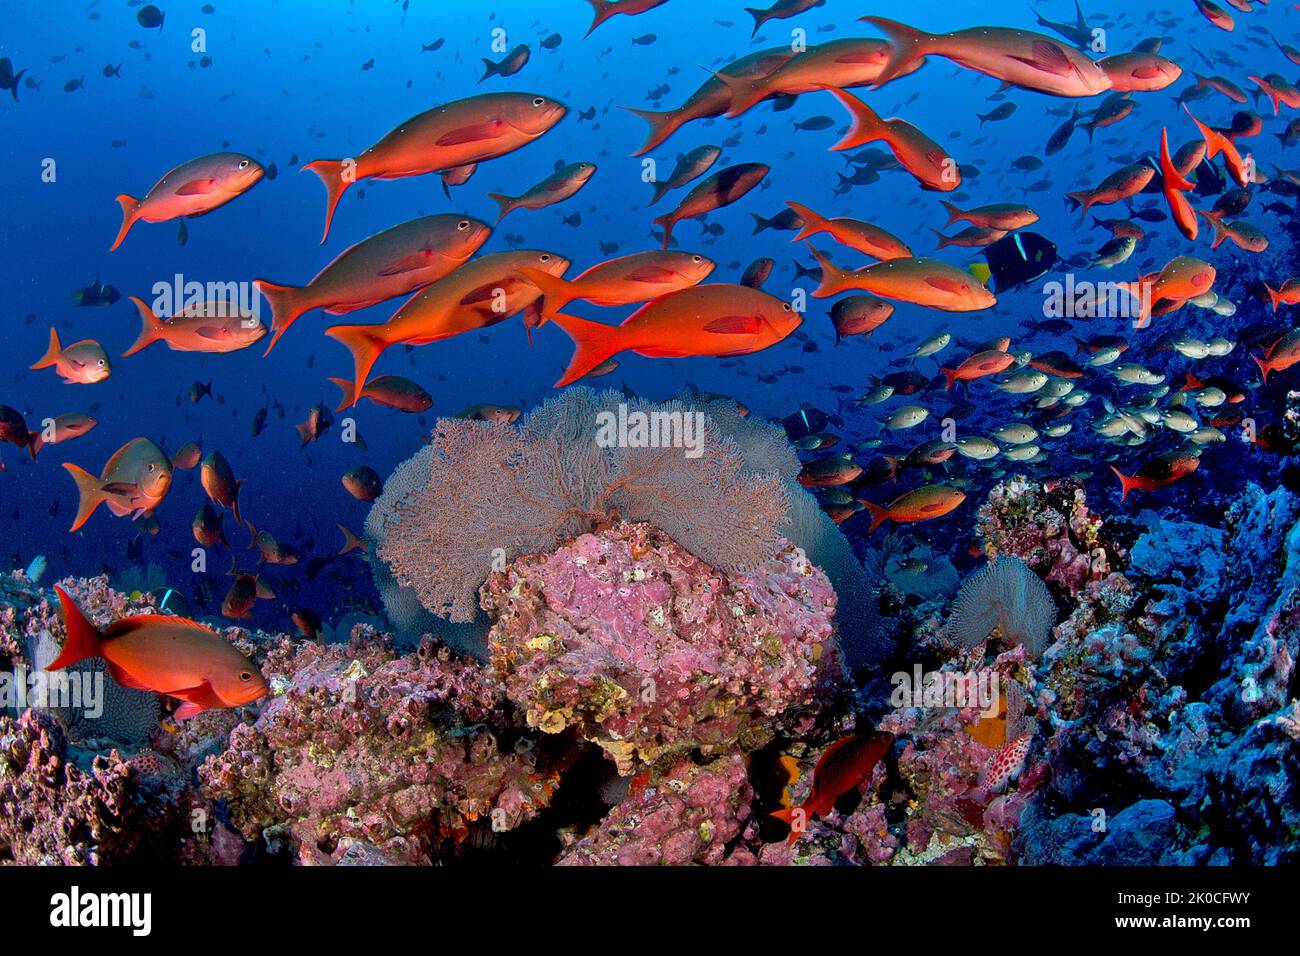 Pacific Creolefish (Paranthias colonus) at a coral reef, Malpelo island, UNESCO World Heritage site, Colombia Stock Photo